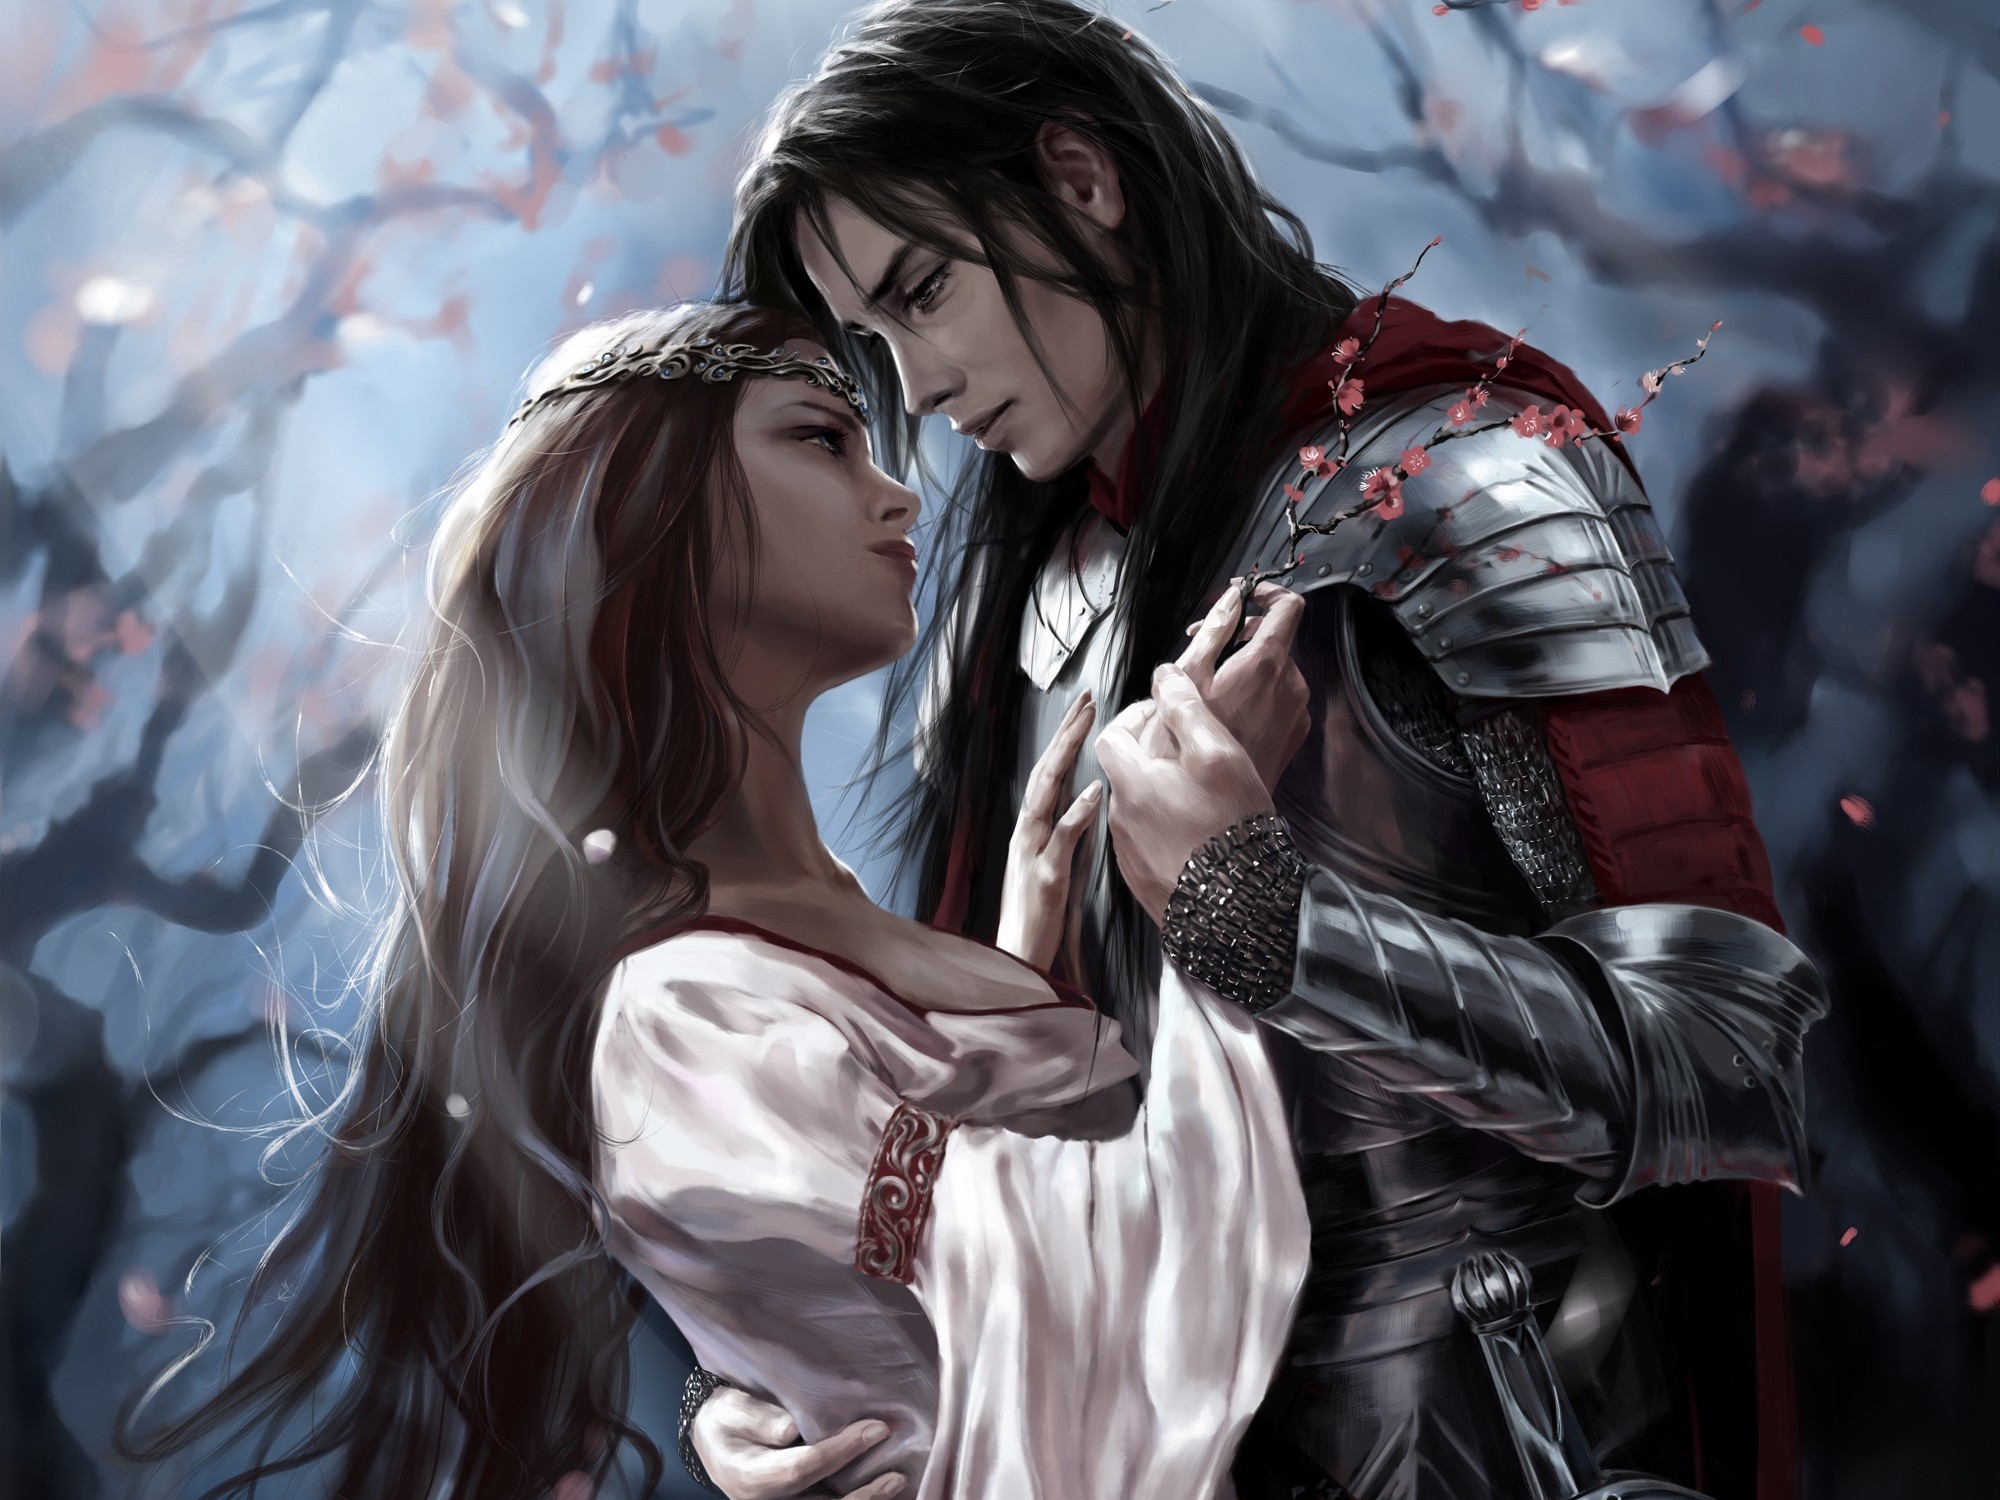 Vertical Backgrounds armor, fantasy, love, knight